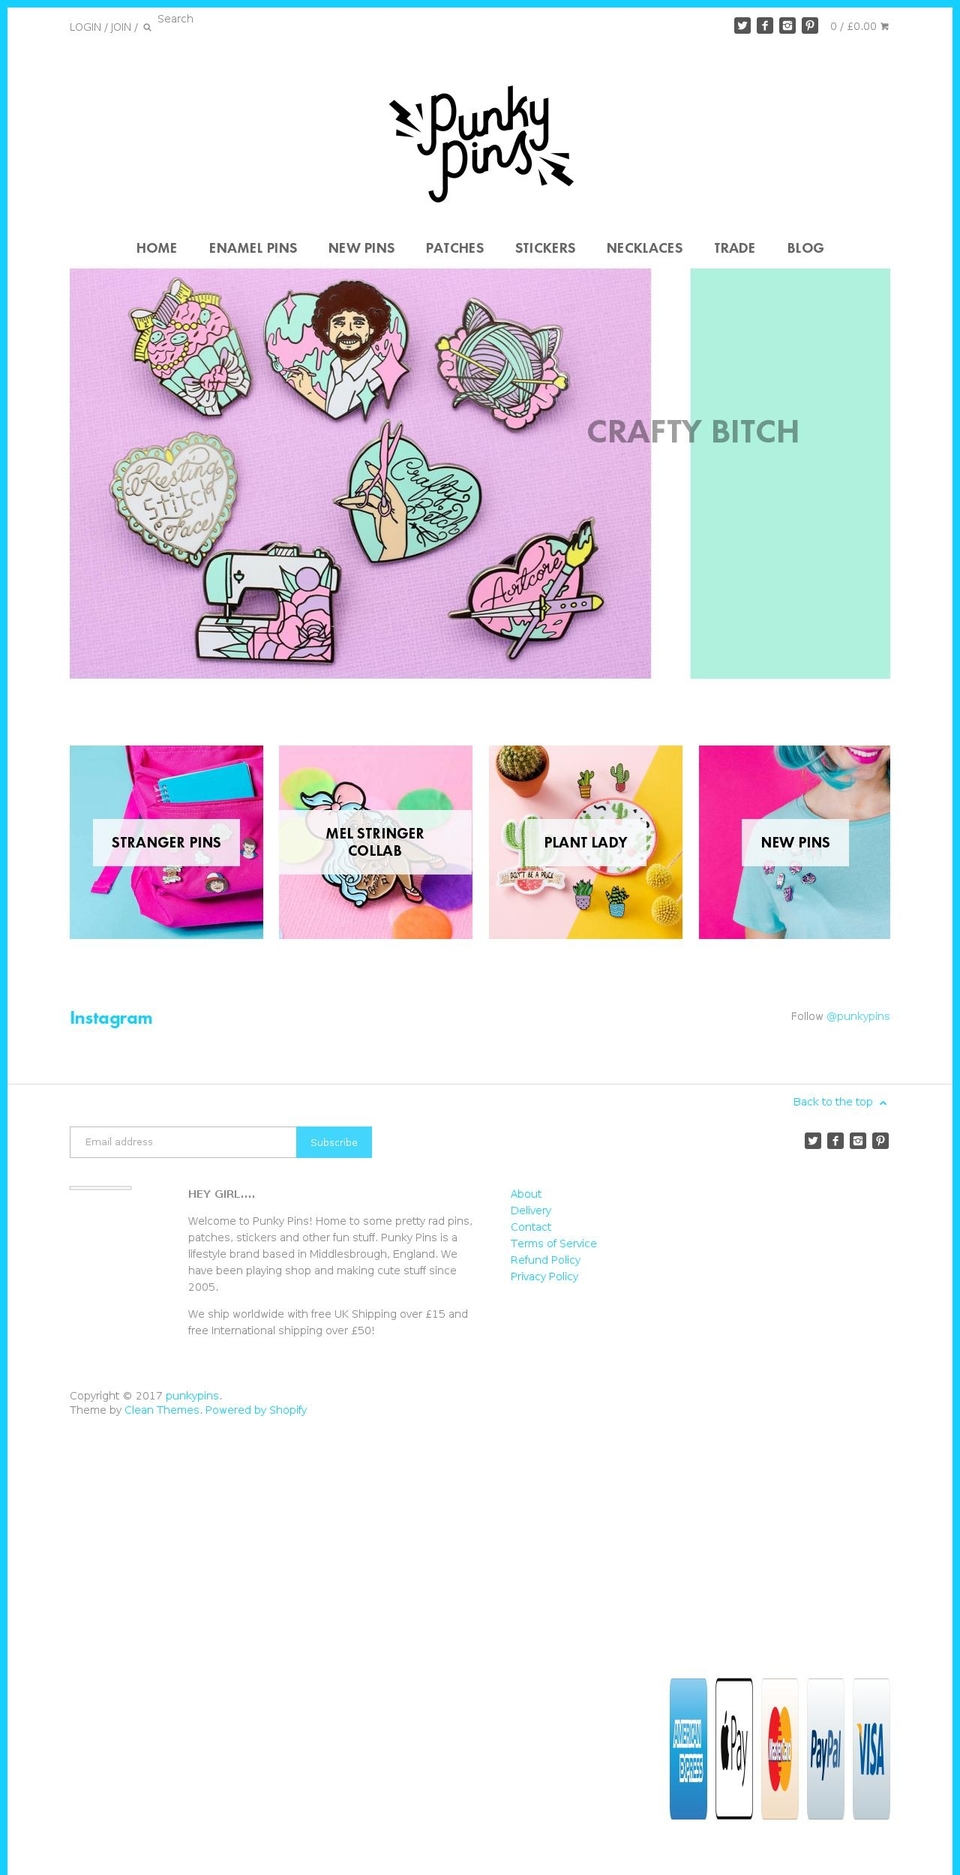 Pipeline Shopify theme site example punkypins.co.uk